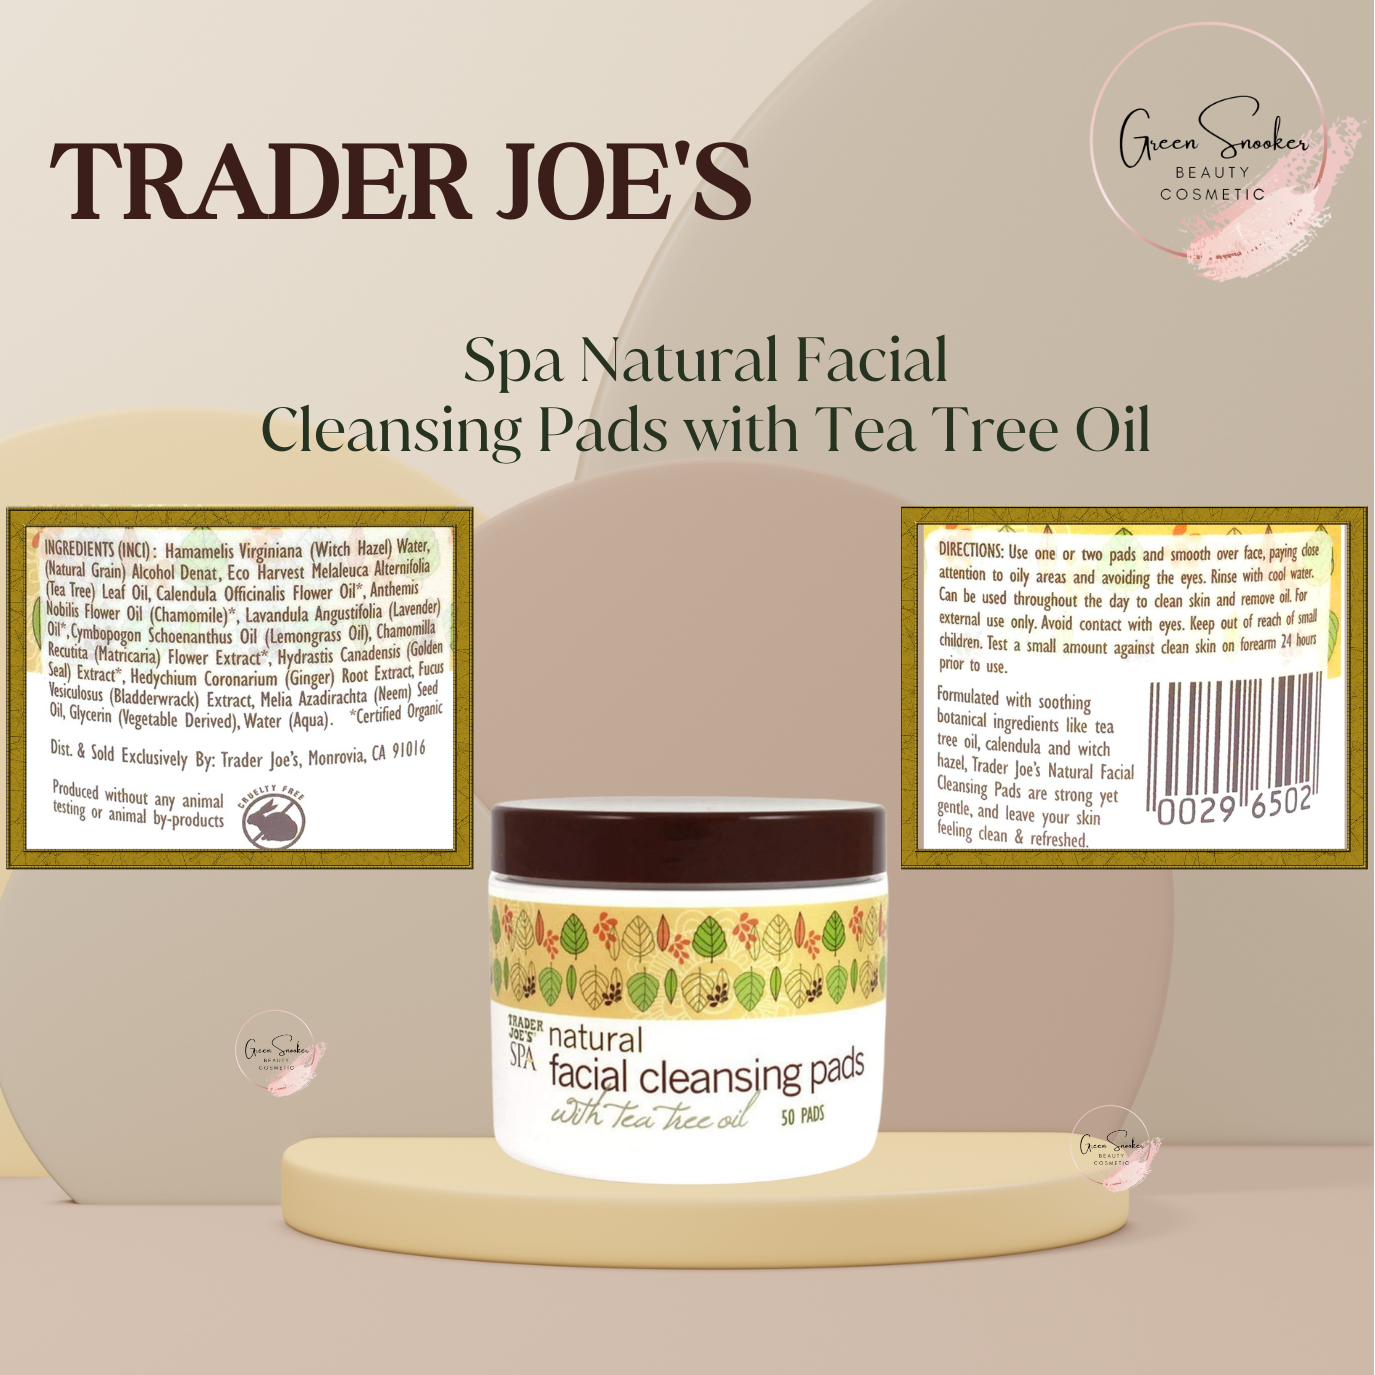 Trader Joe's, Spa Natural Facial Cleansing Pads with Tea Tree Oil